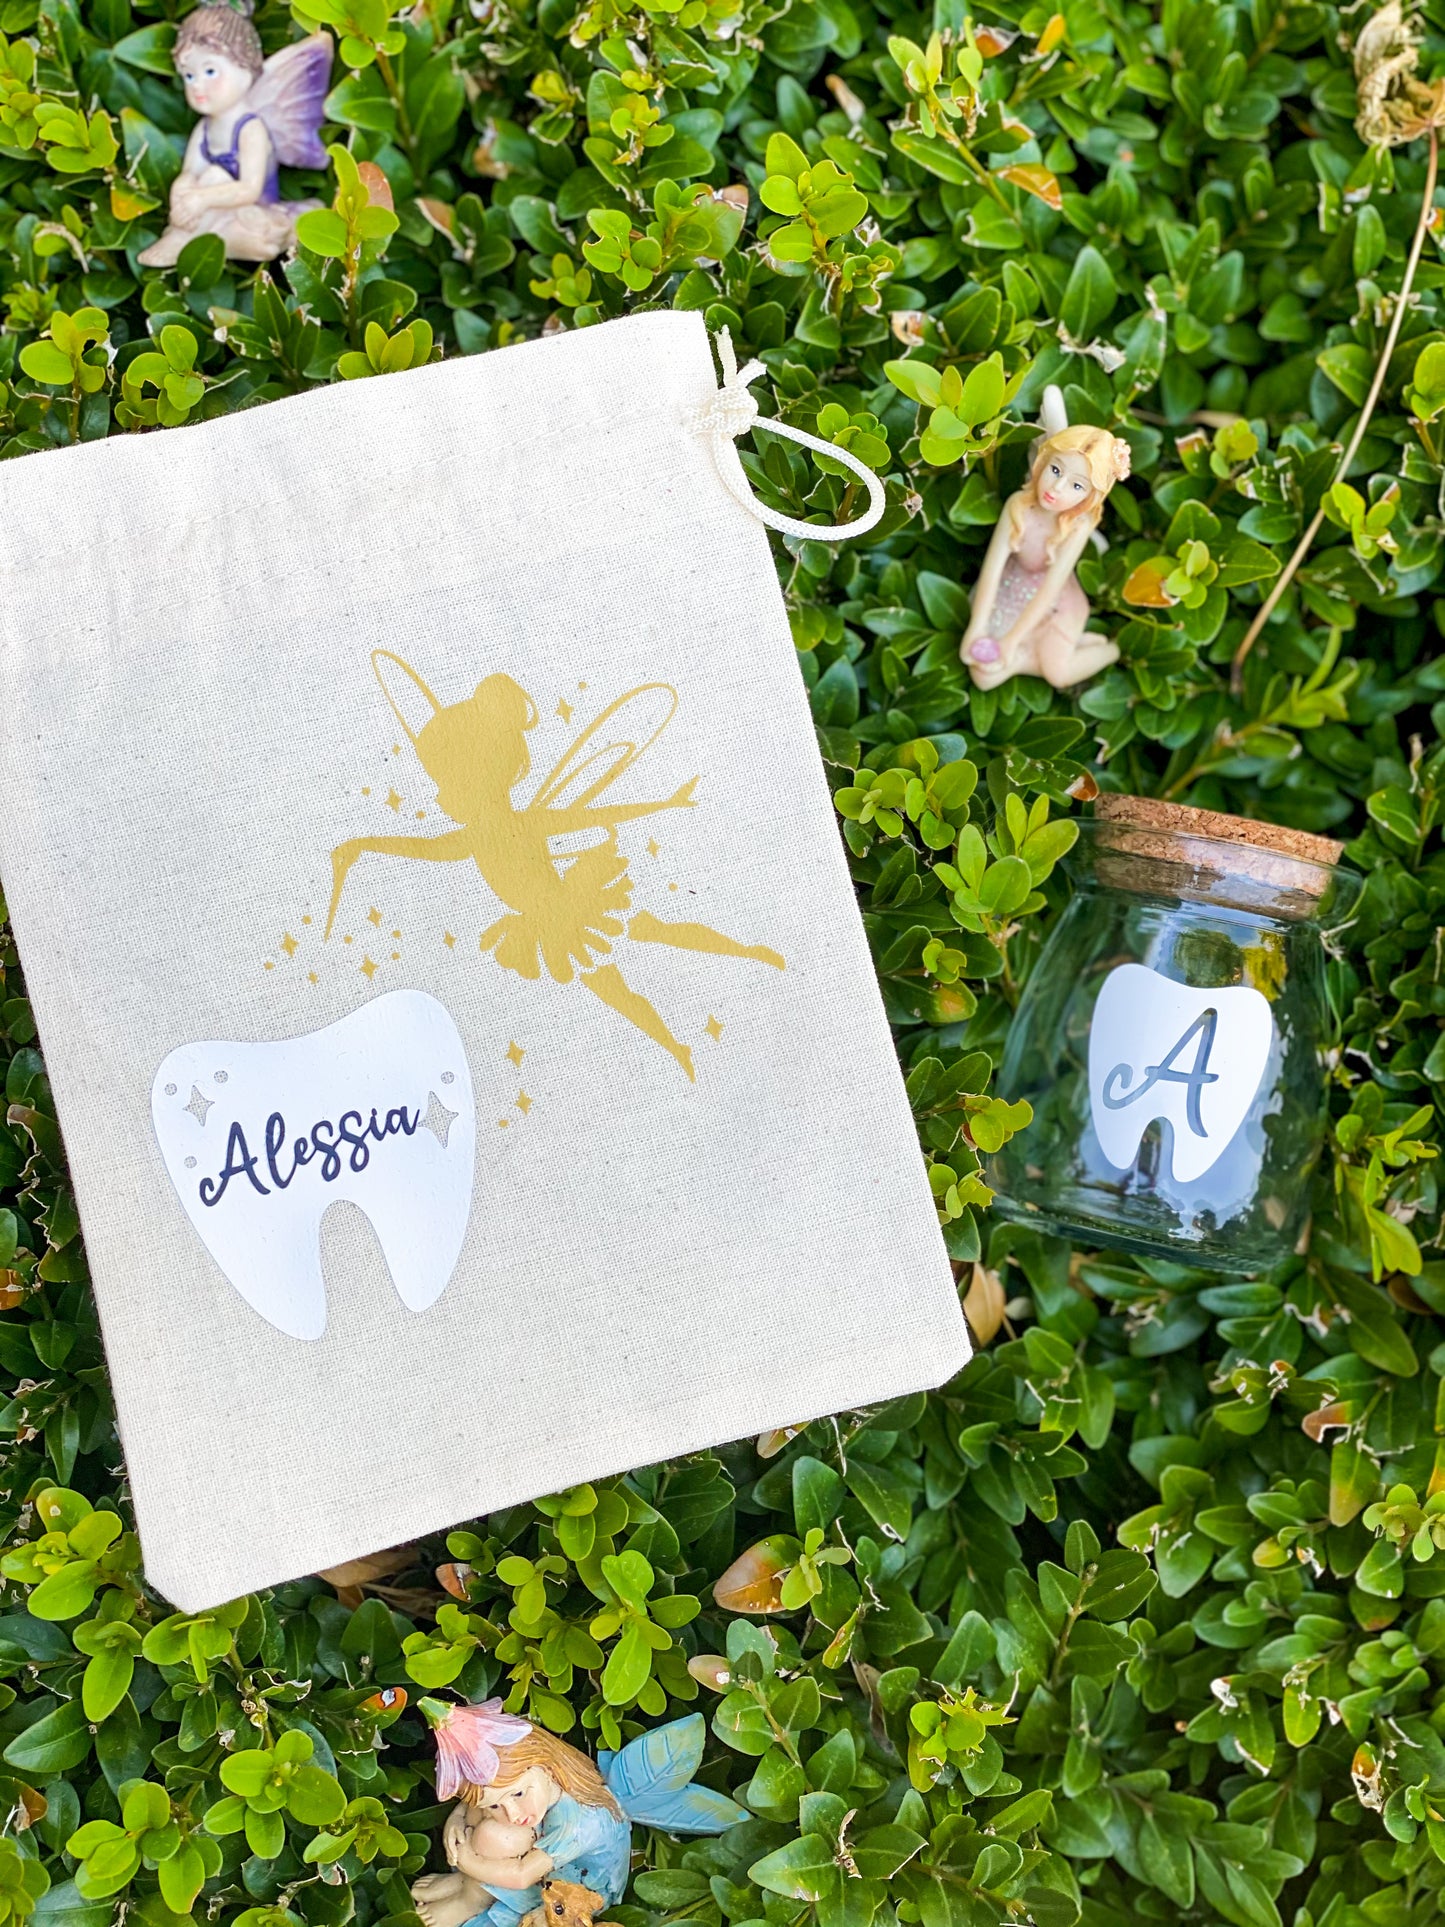 Personalized Tooth Fairy Jar and Bag